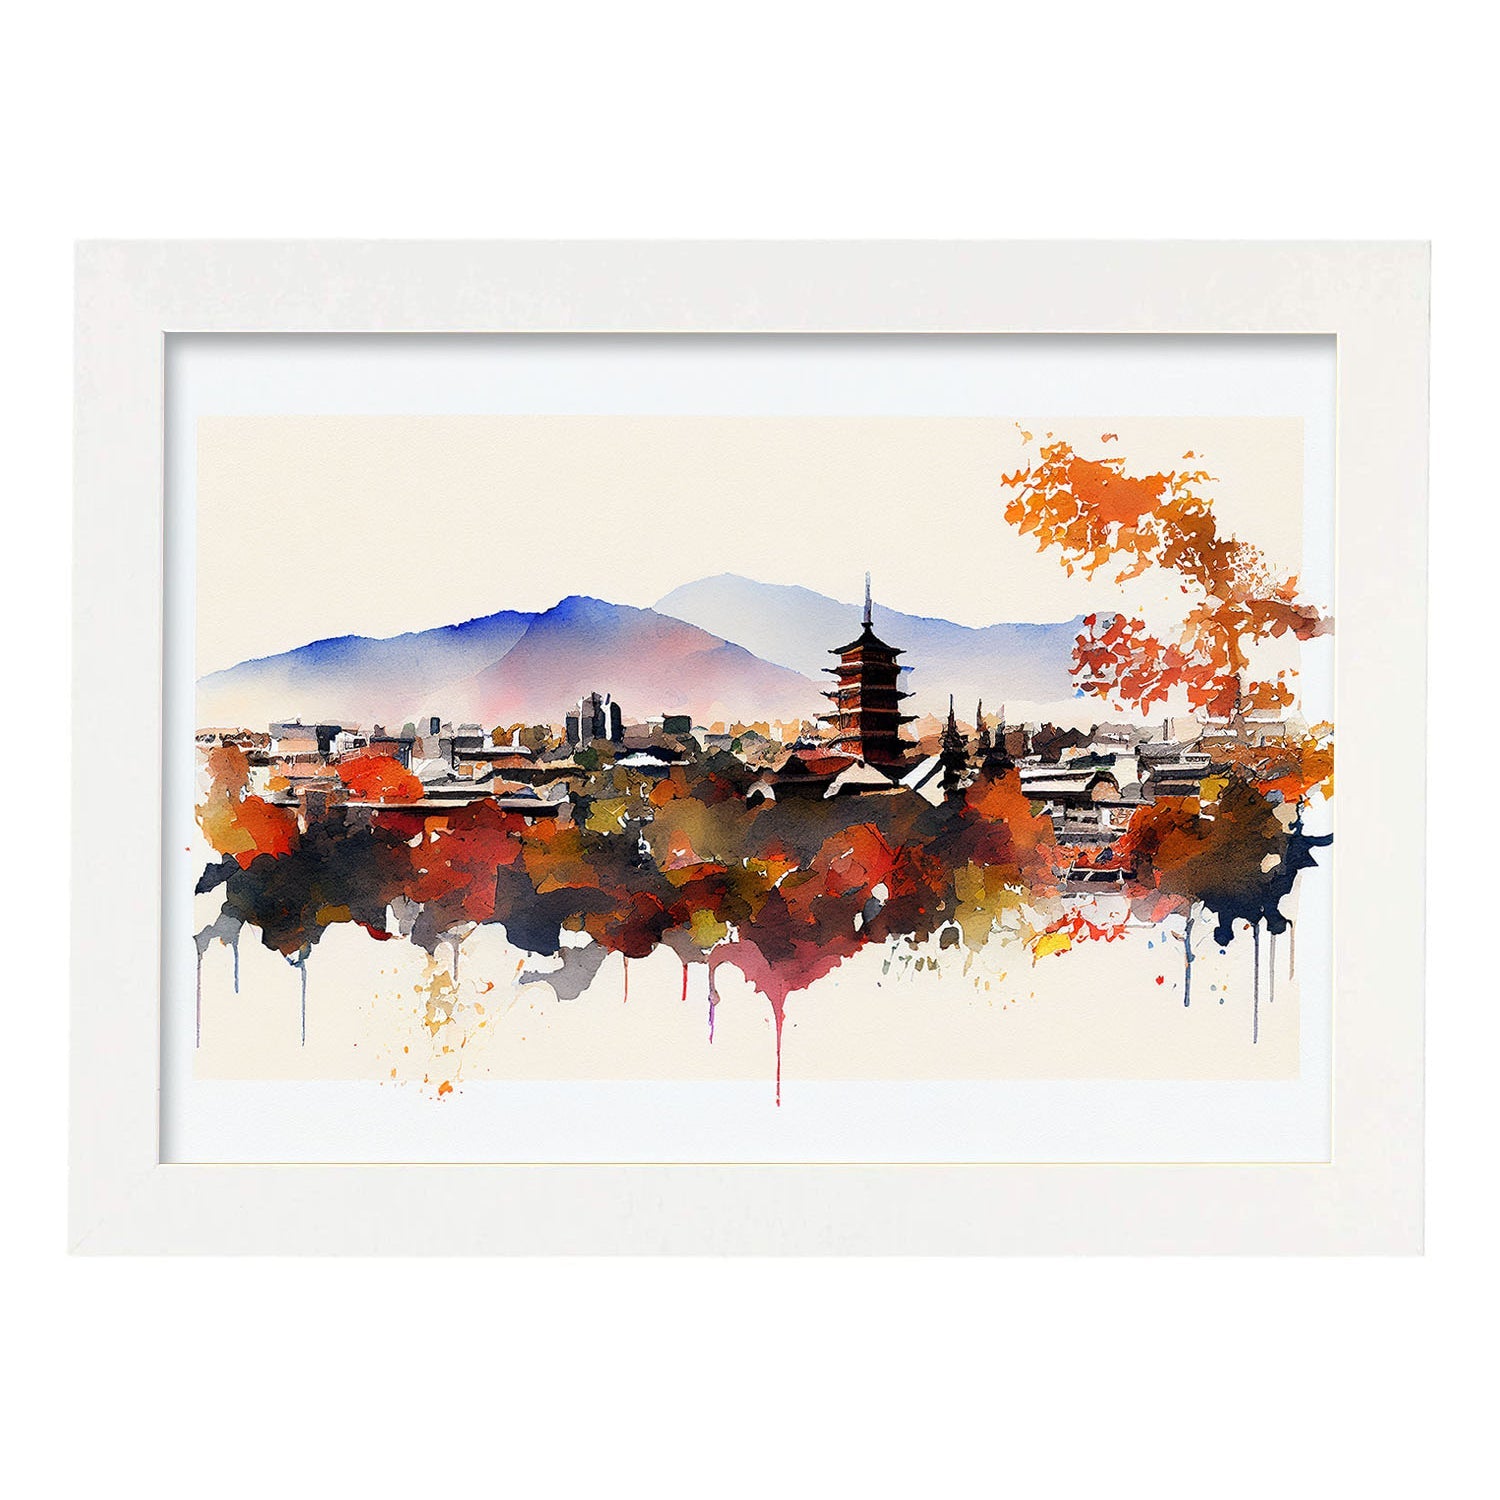 Nacnic watercolor of a skyline of the city of Kyoto_1. Aesthetic Wall Art Prints for Bedroom or Living Room Design.-Artwork-Nacnic-A4-Marco Blanco-Nacnic Estudio SL